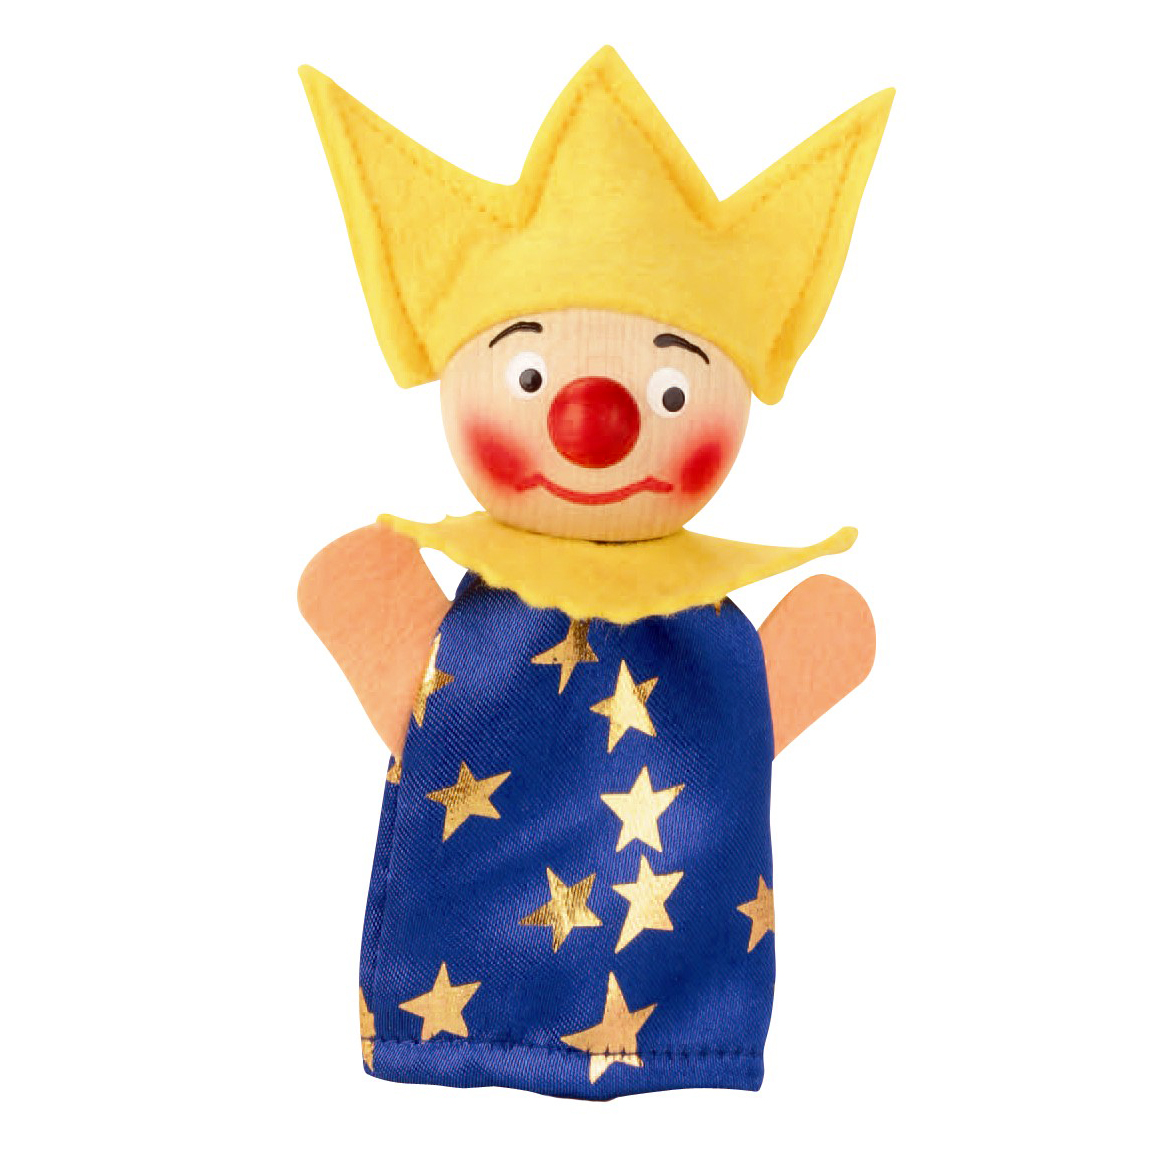 Finger puppet young king - KERSA Fipu